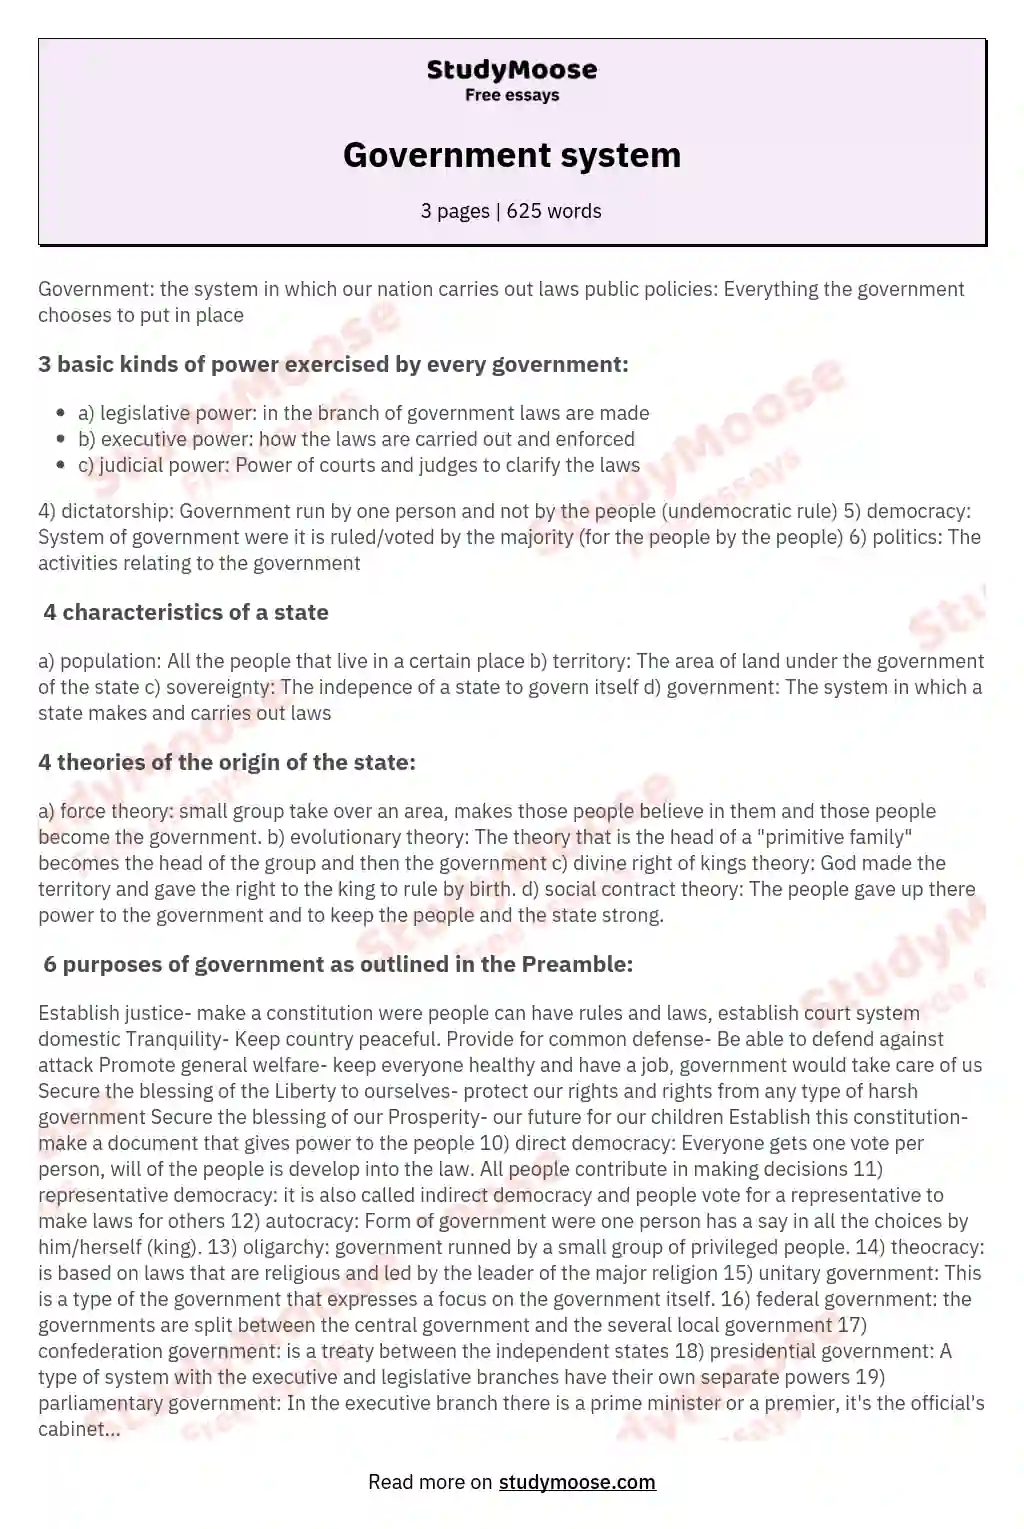 Government system essay